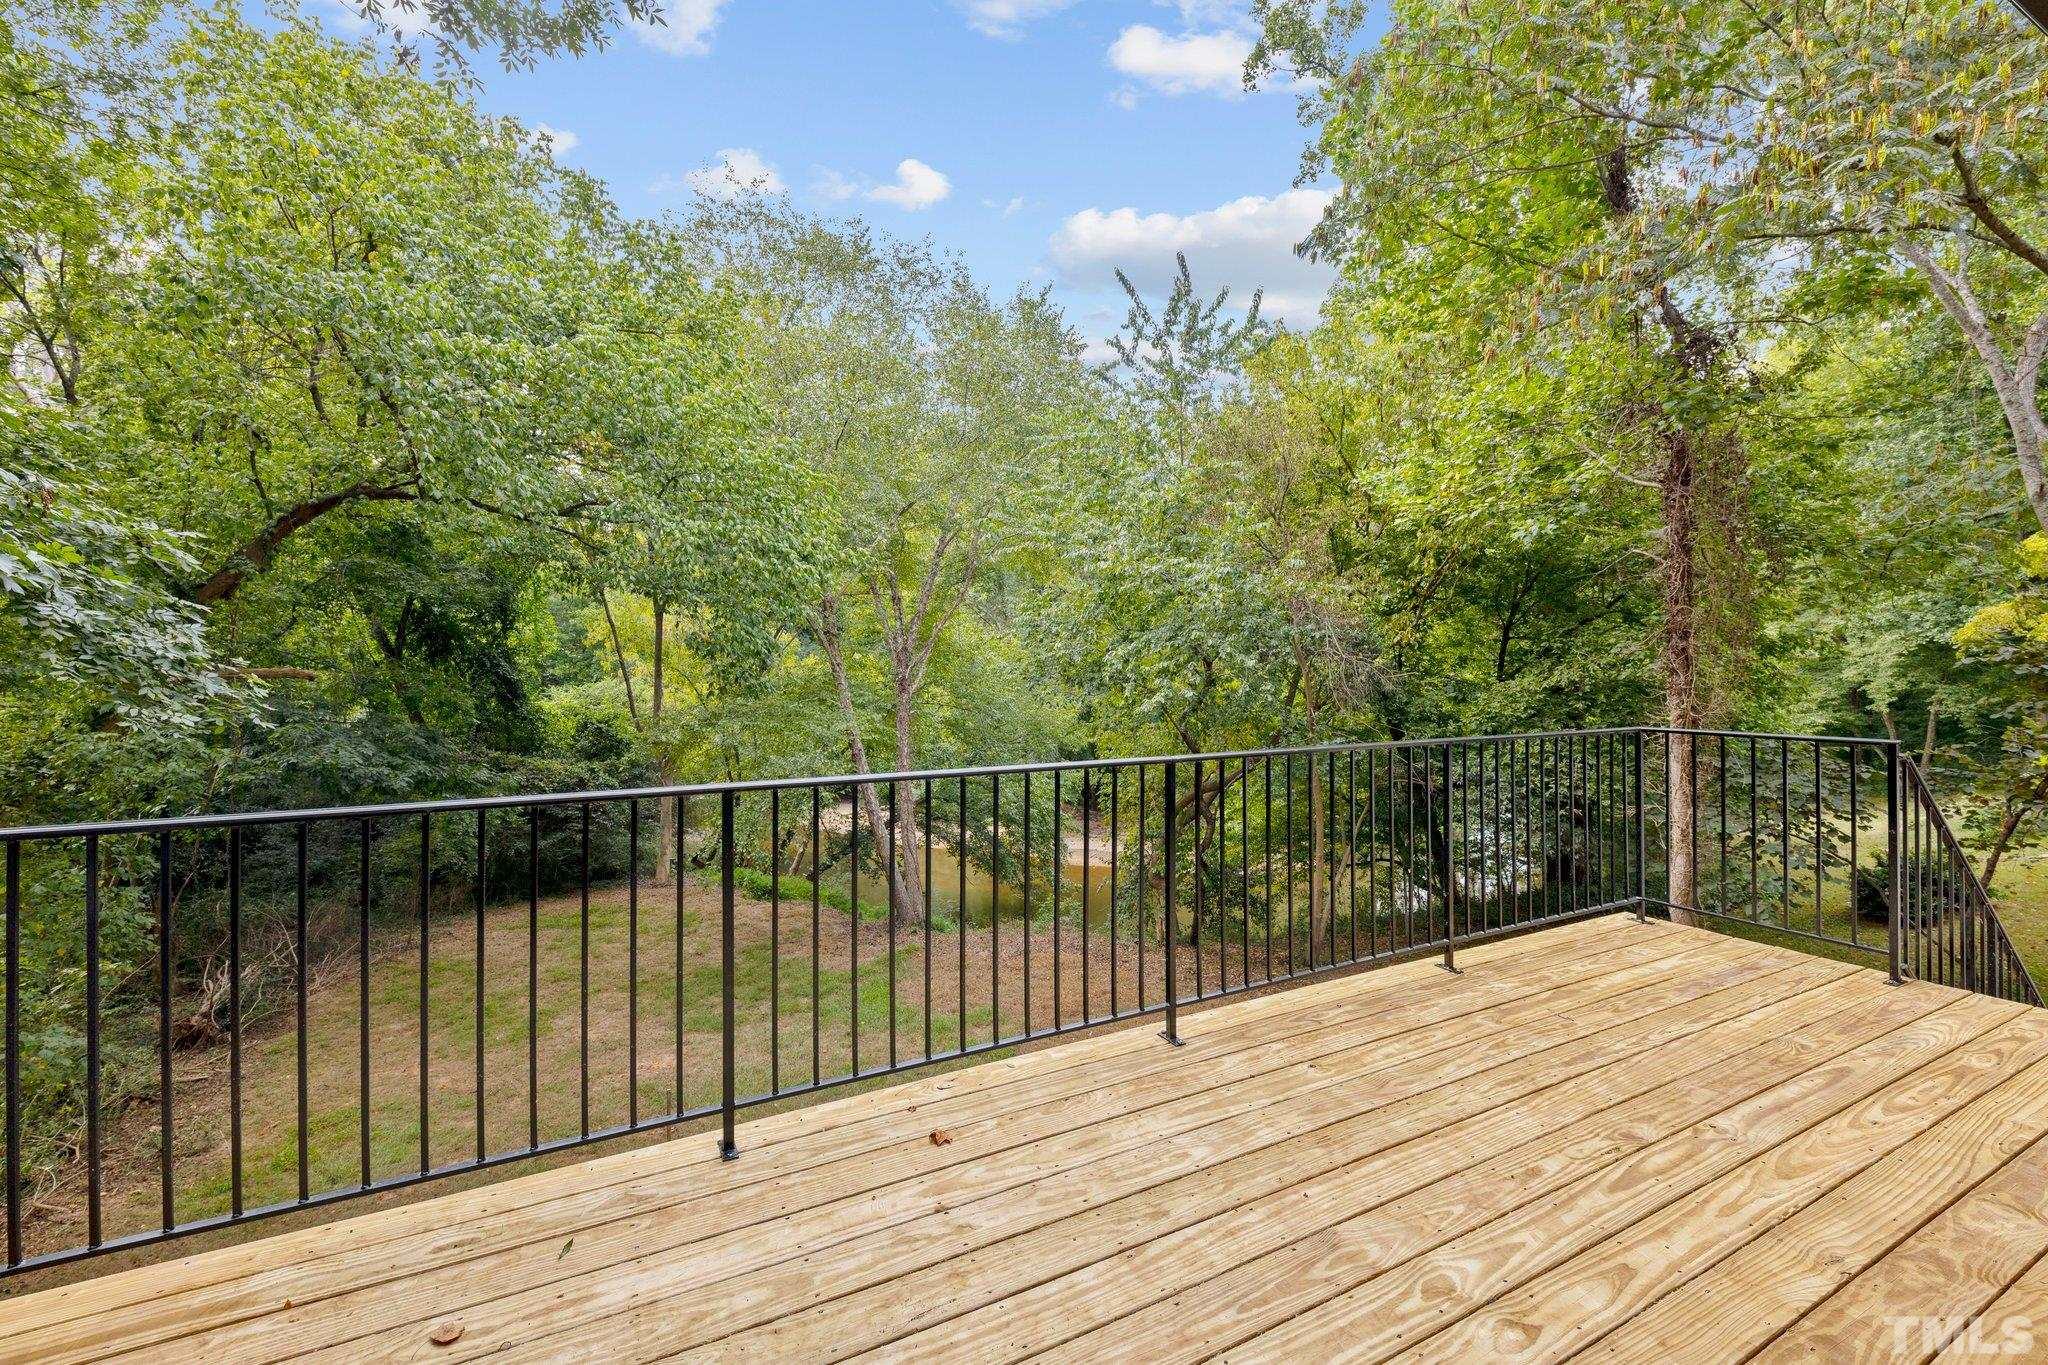 You will have to see this view to believe it! Relax and enjoy the peaceful view of Crabtree Creek.